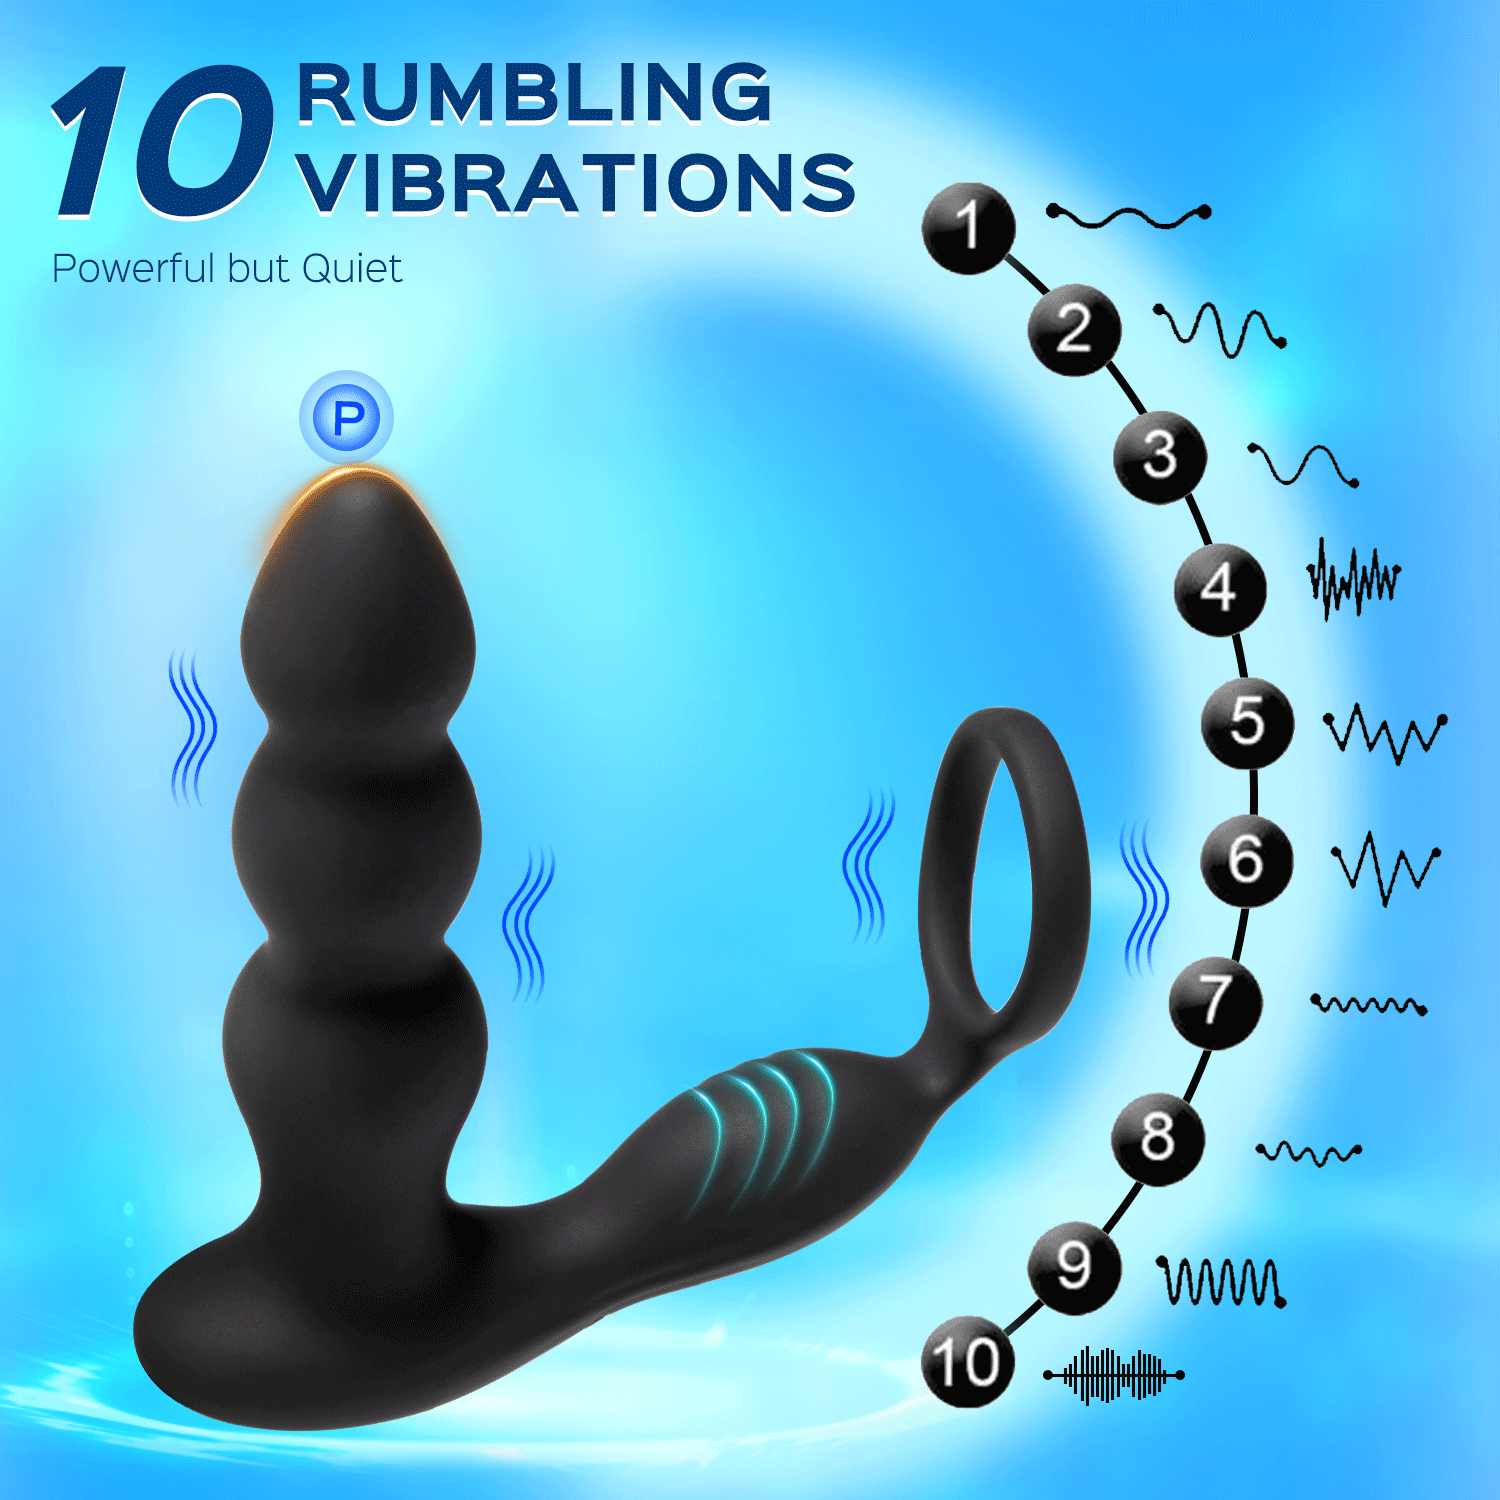 Ringer - 3 Anal Beads Prostate Massager Butt Plug with Cock Ring & Remote Control